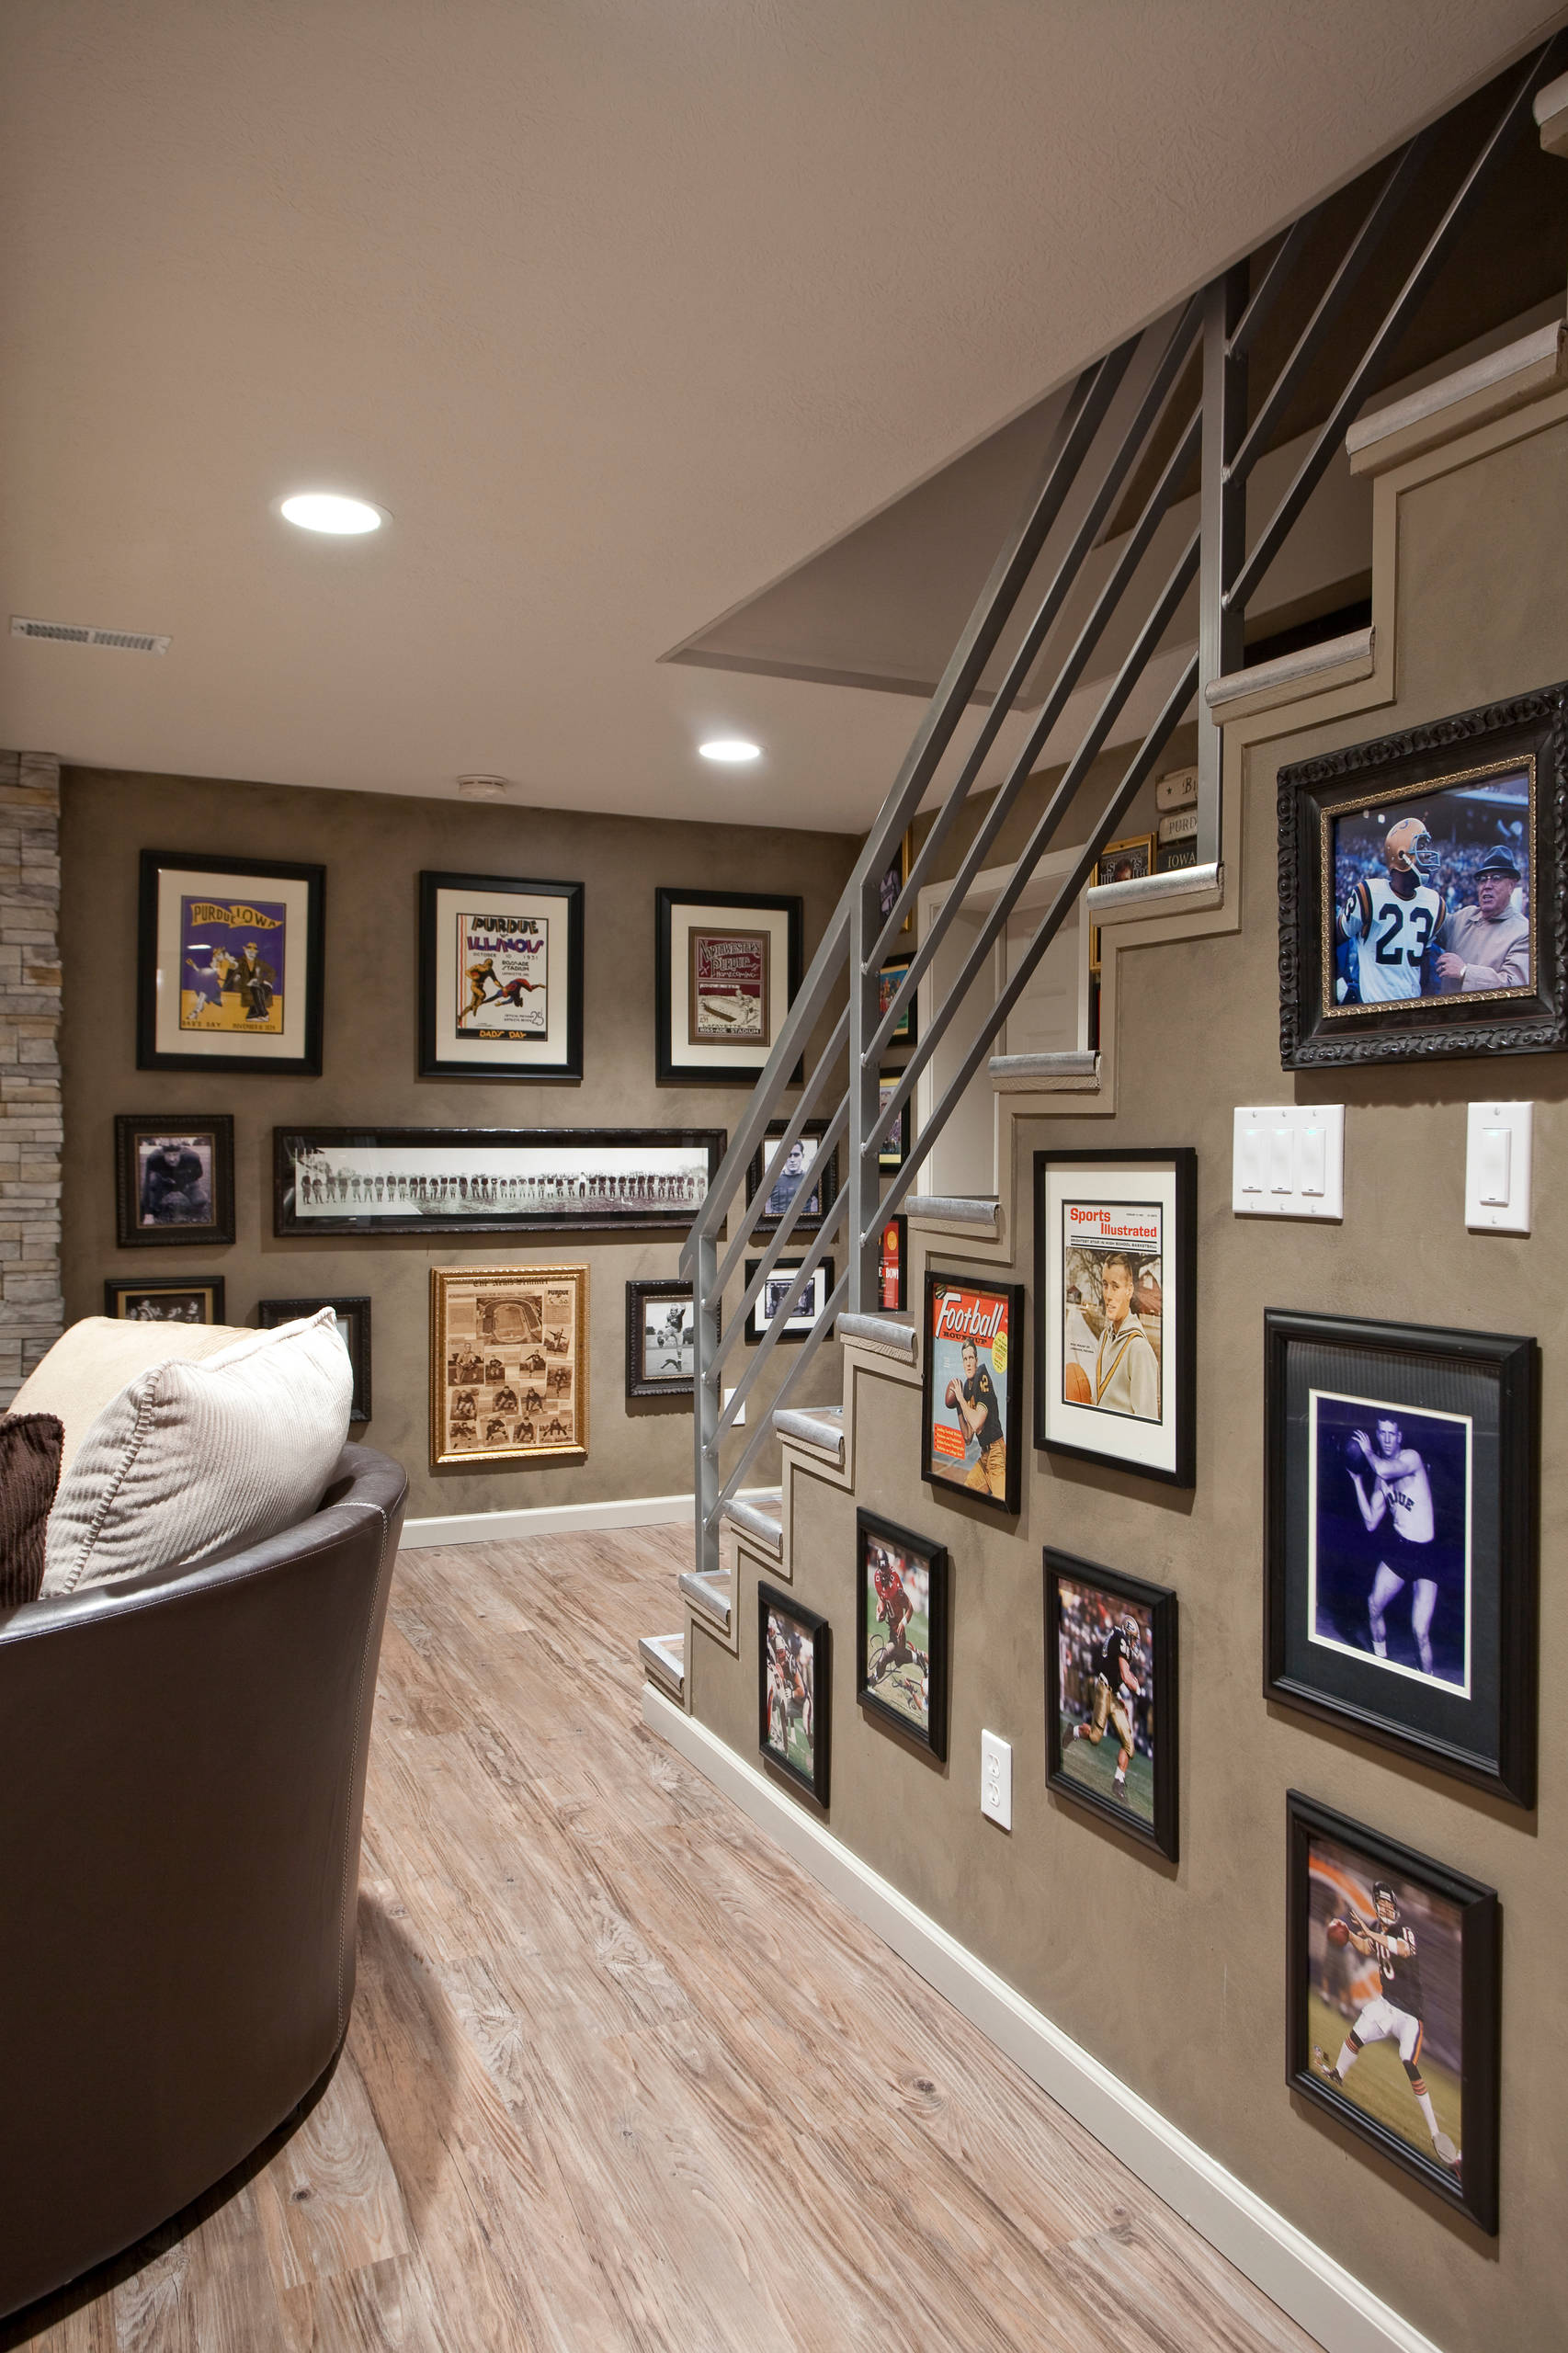 Man Cave Ideas - Here ís a sports bar in the basement. A pro